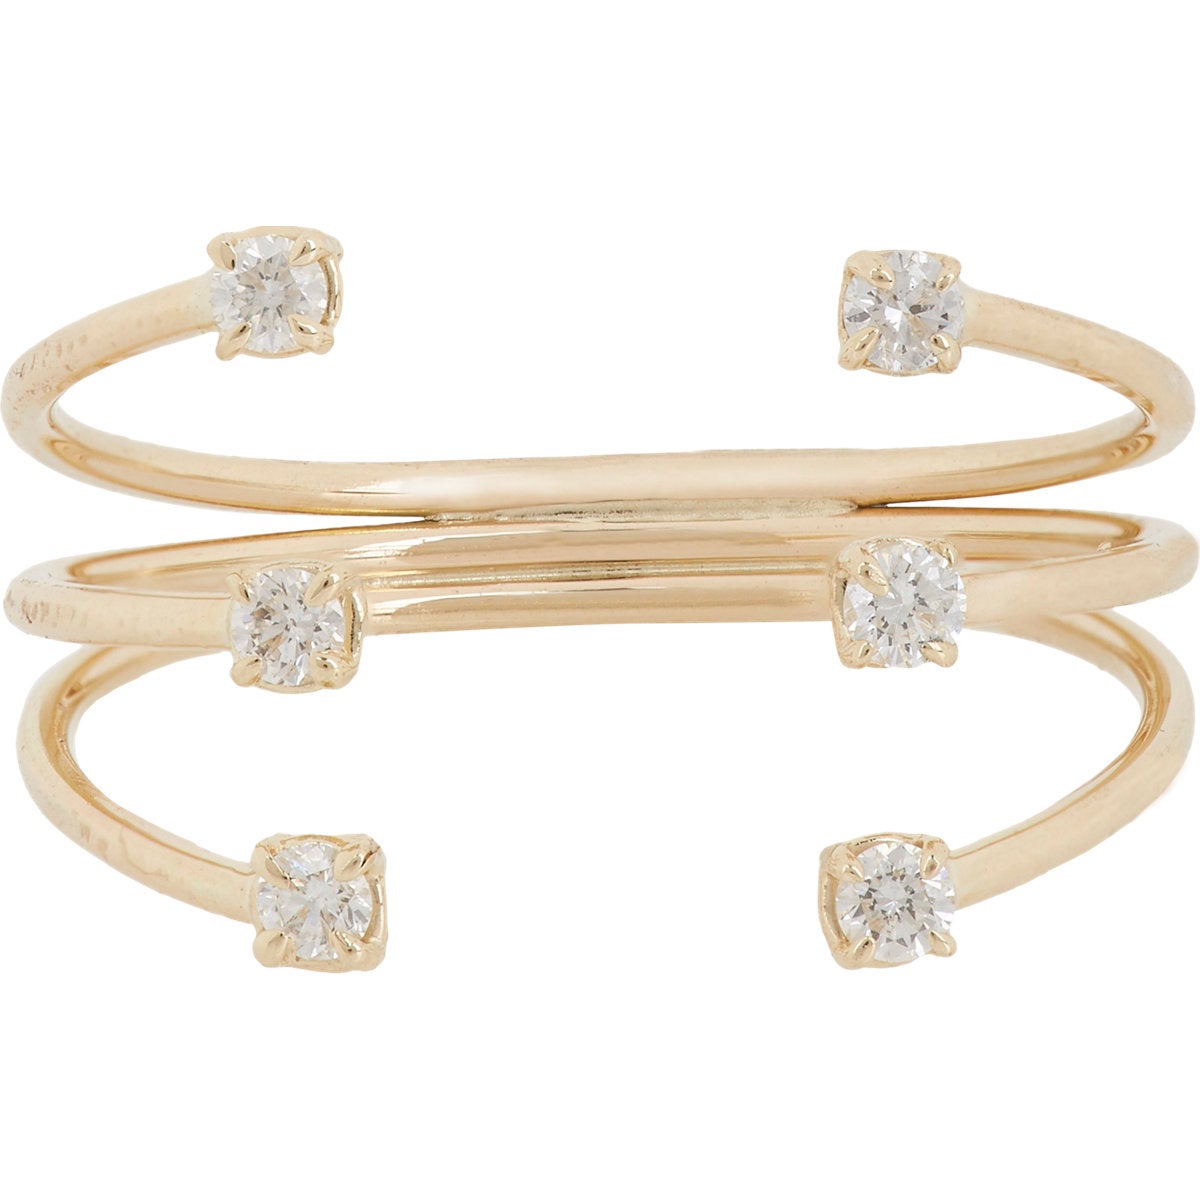 15 Non-Traditional Engagement Rings